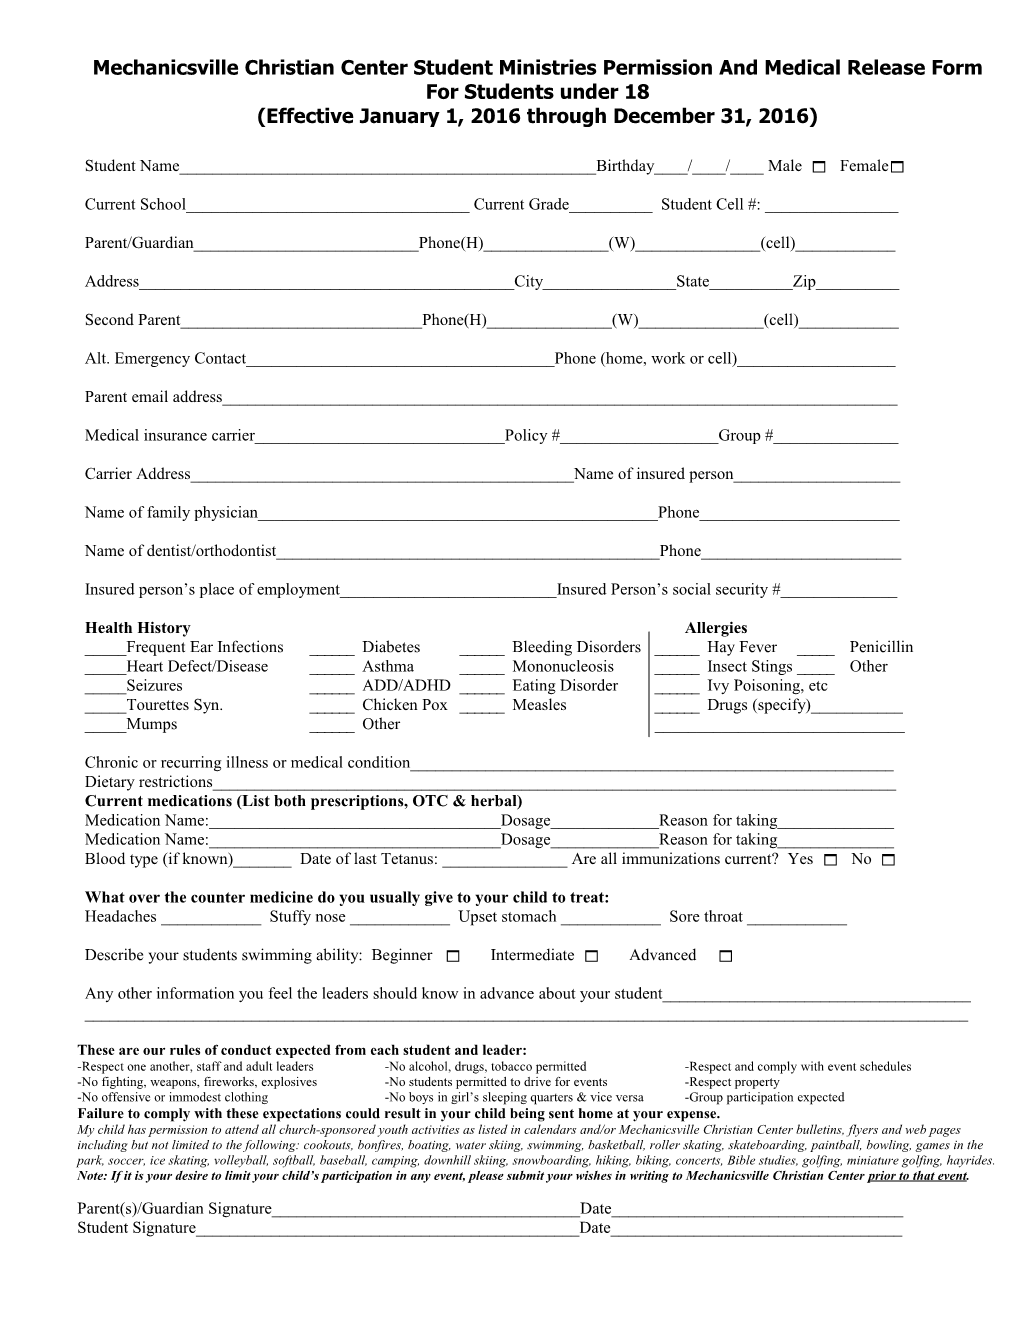 Mechanicsville Christian Center Student Ministries Permission and Medical Release Form